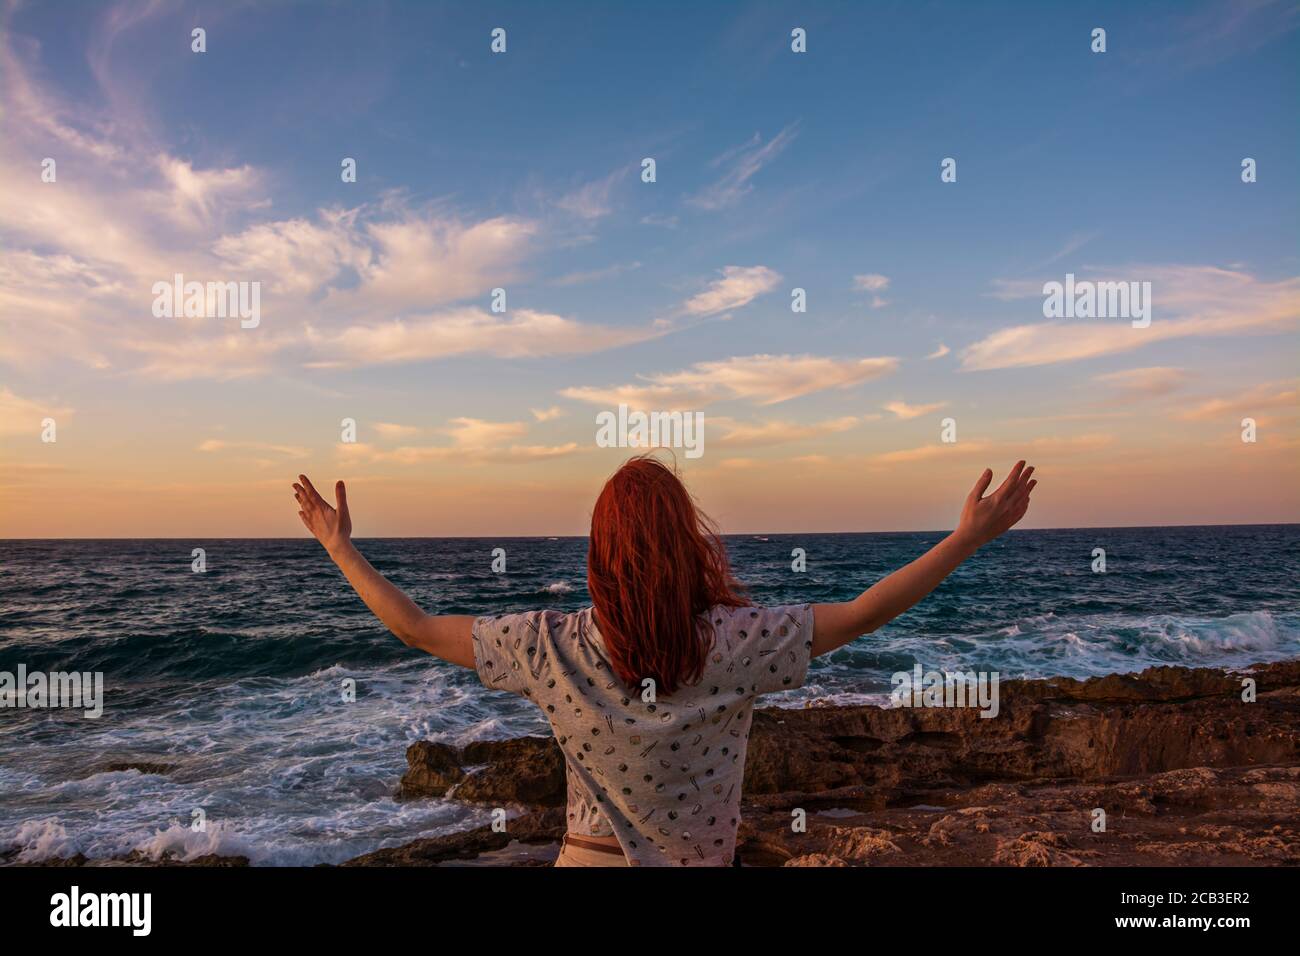 A young girl open arms under the sunset at seaside, Freedom and happiness Stock Photo